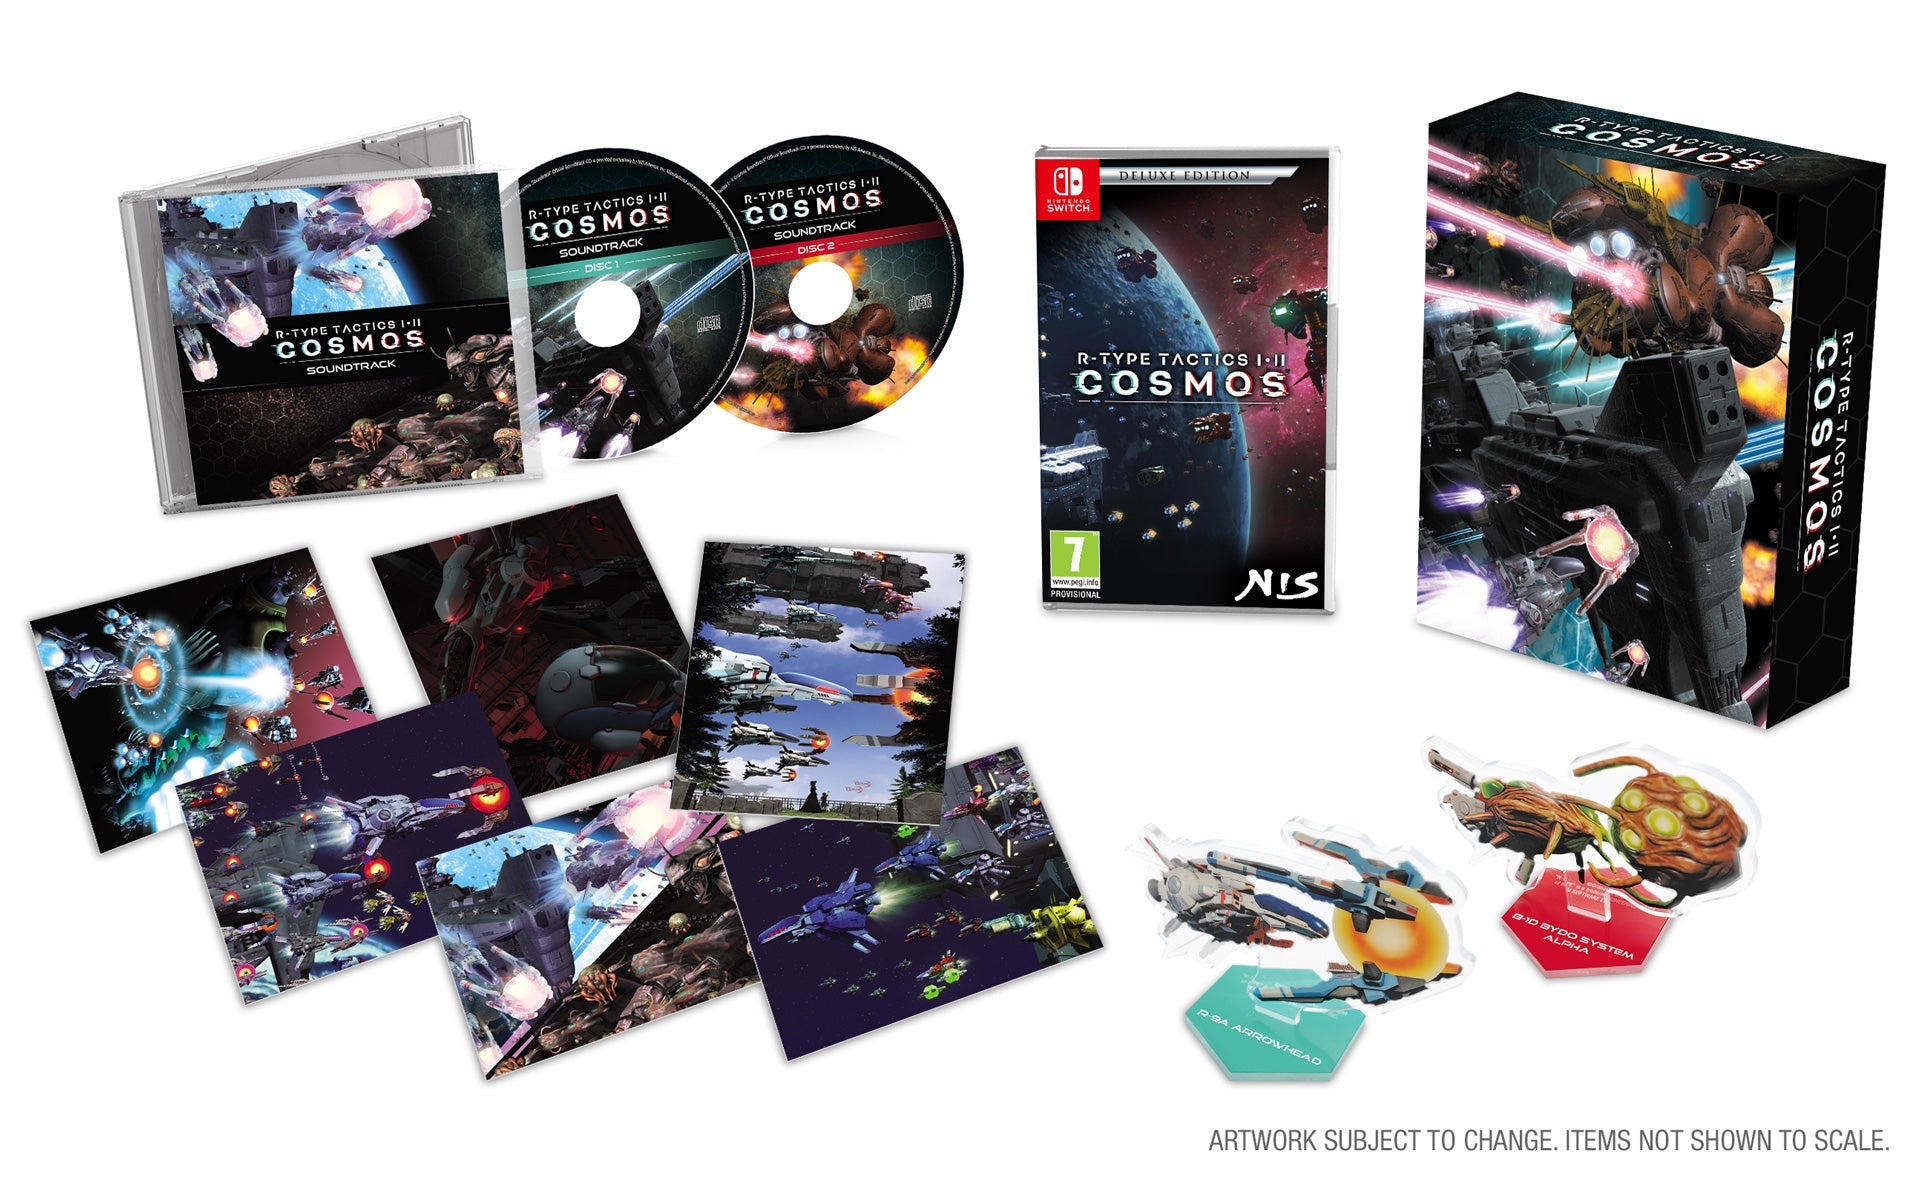 R-Type Tactics I • II COSMOS - Limited Edition - Nintendo Switch™